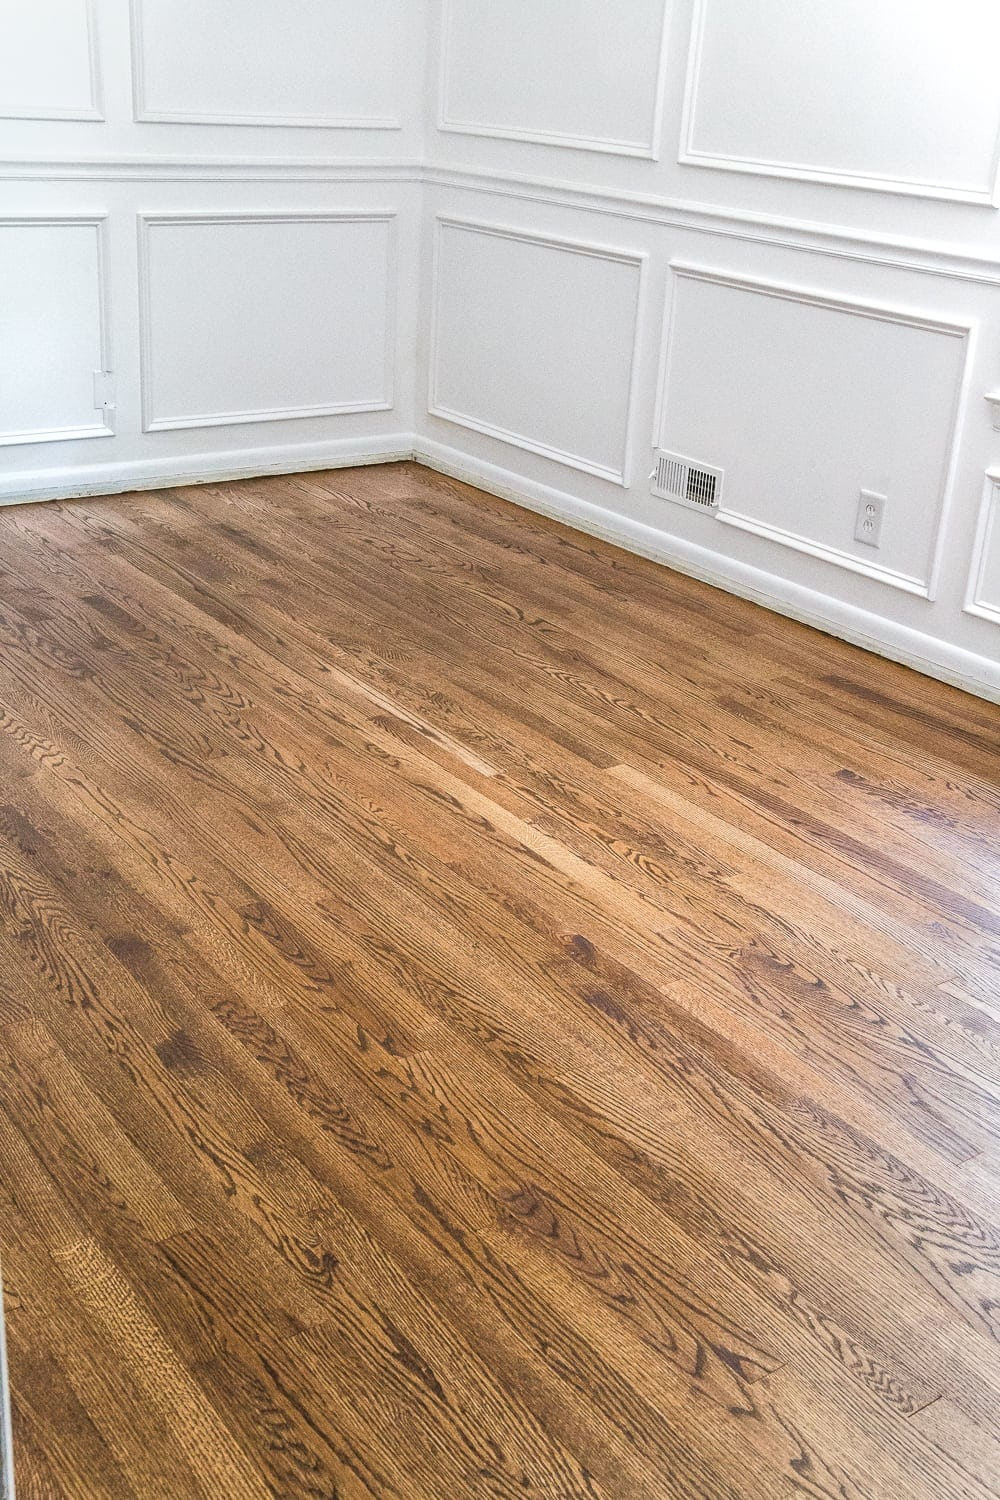 Minwax Provincial Stain + a step-by-step guide for refinishing hardwood floors